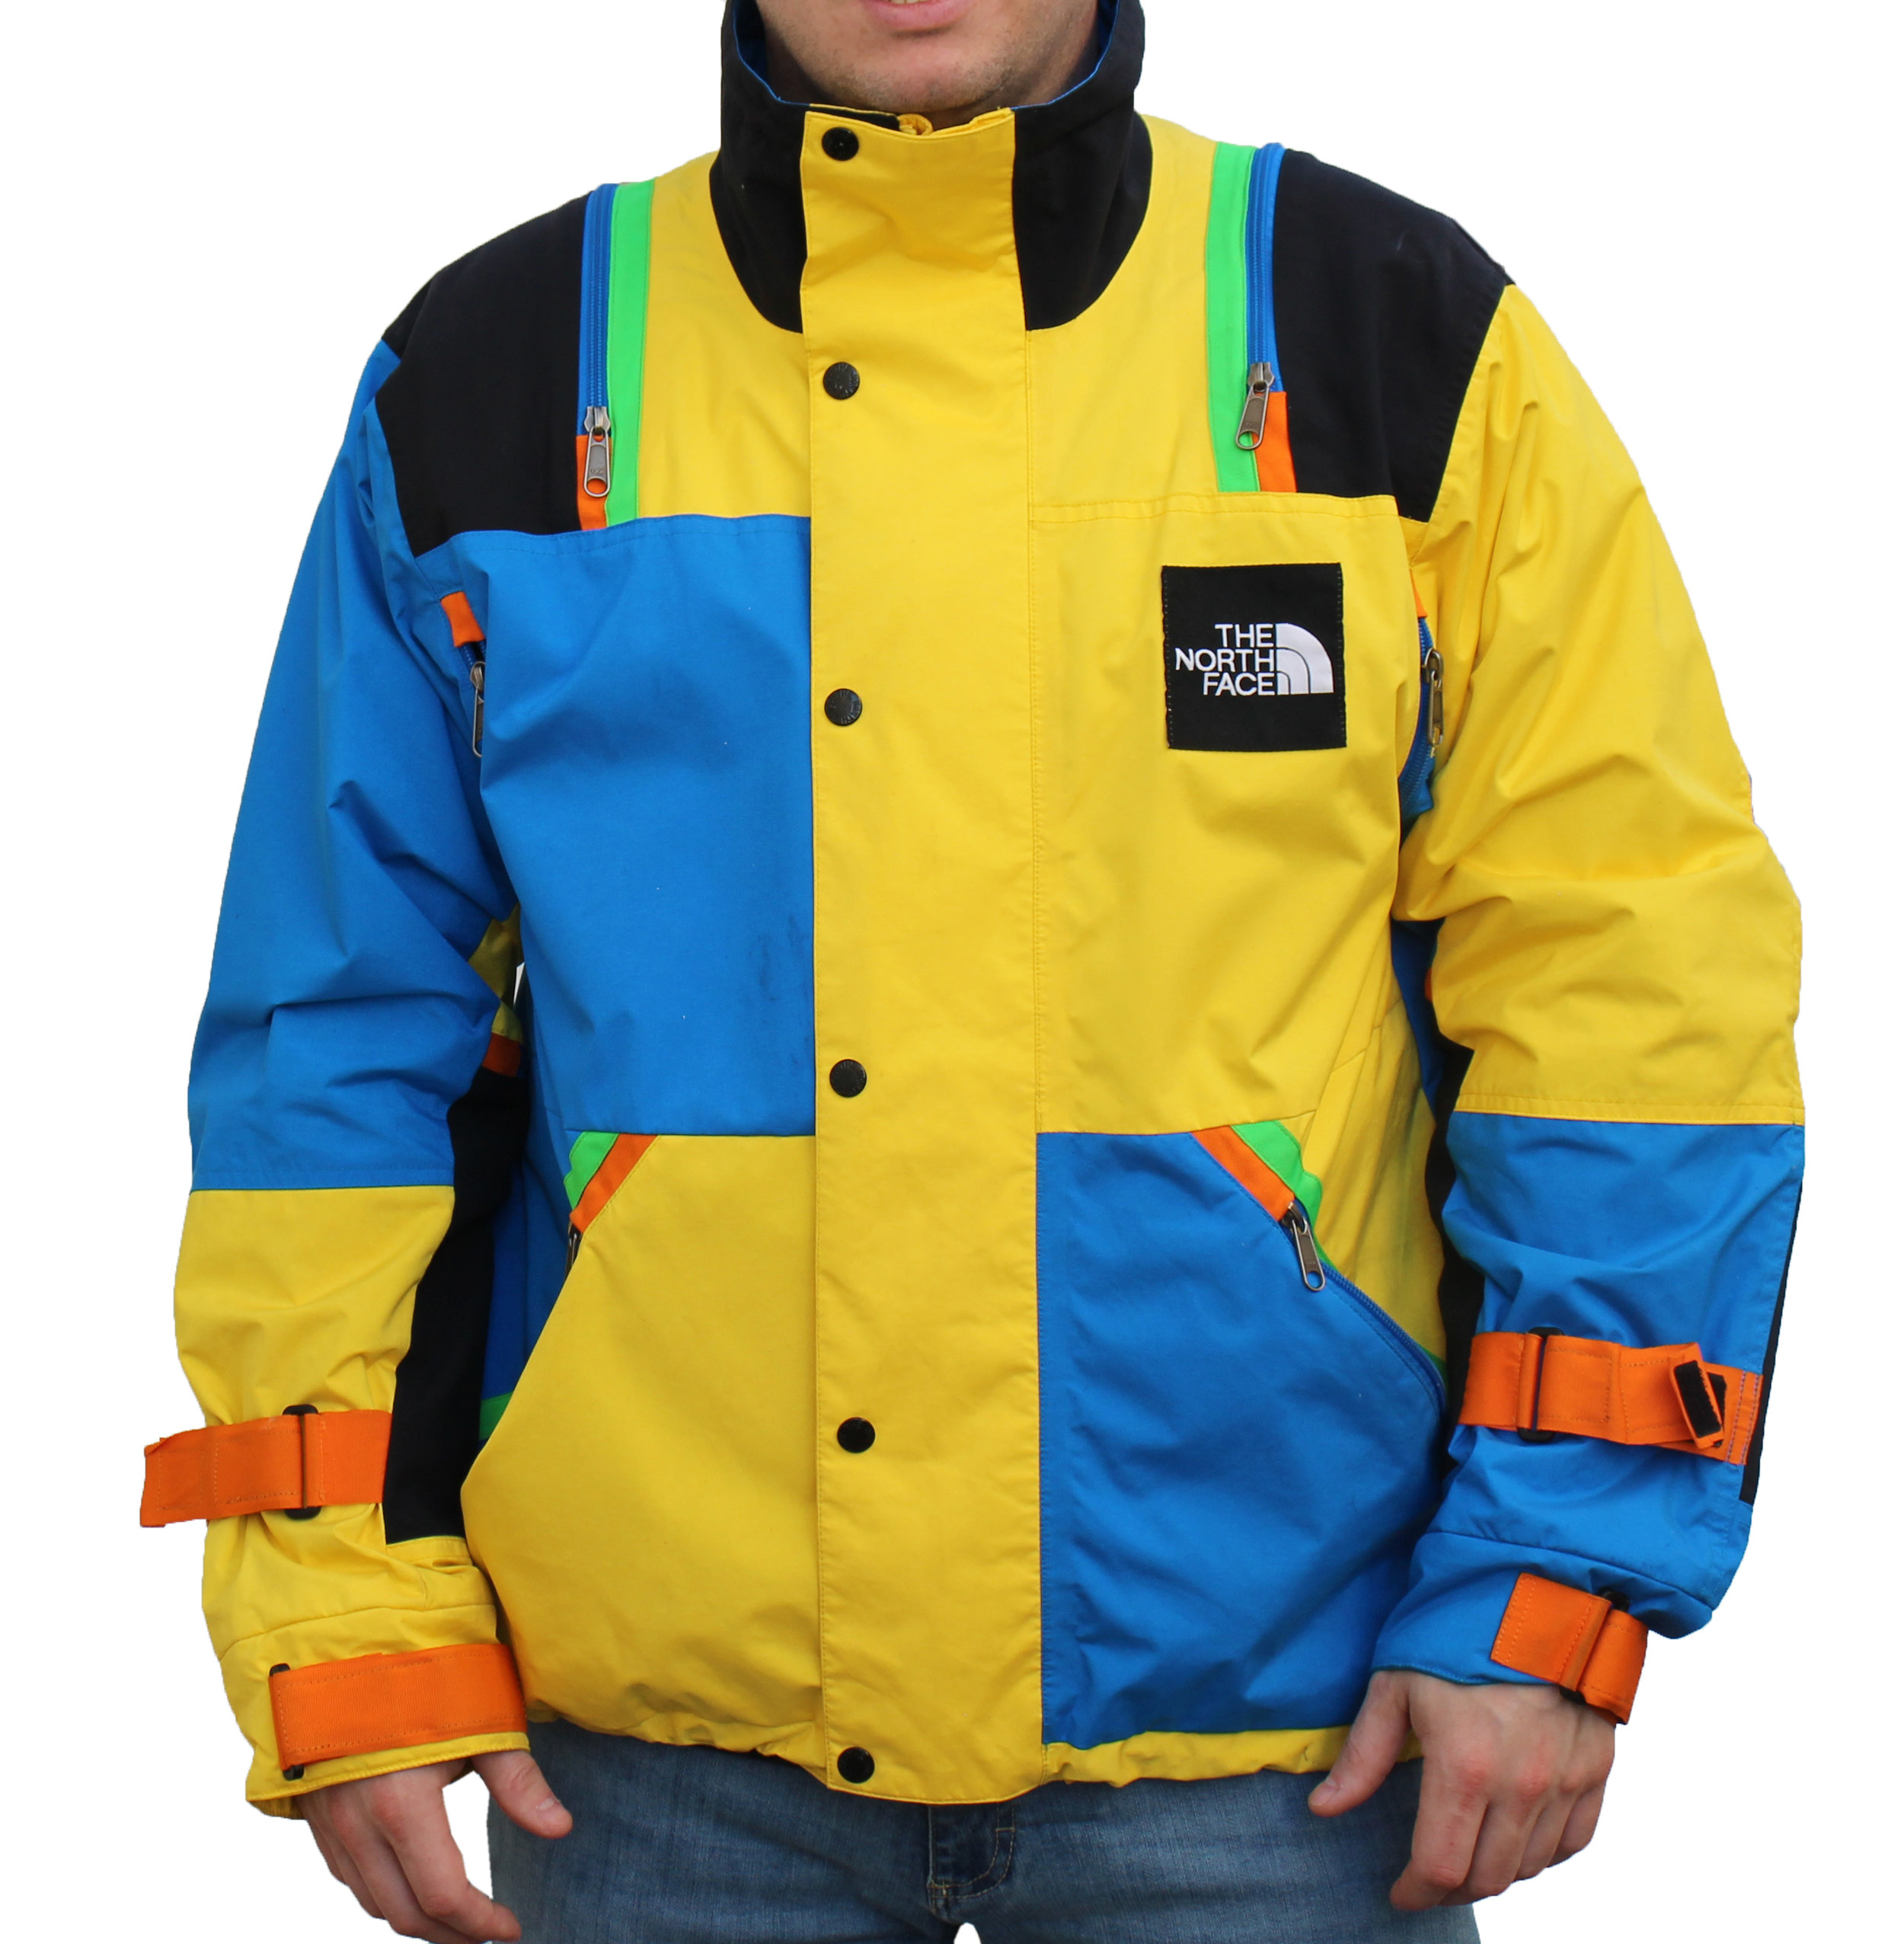 north face colourful jacket